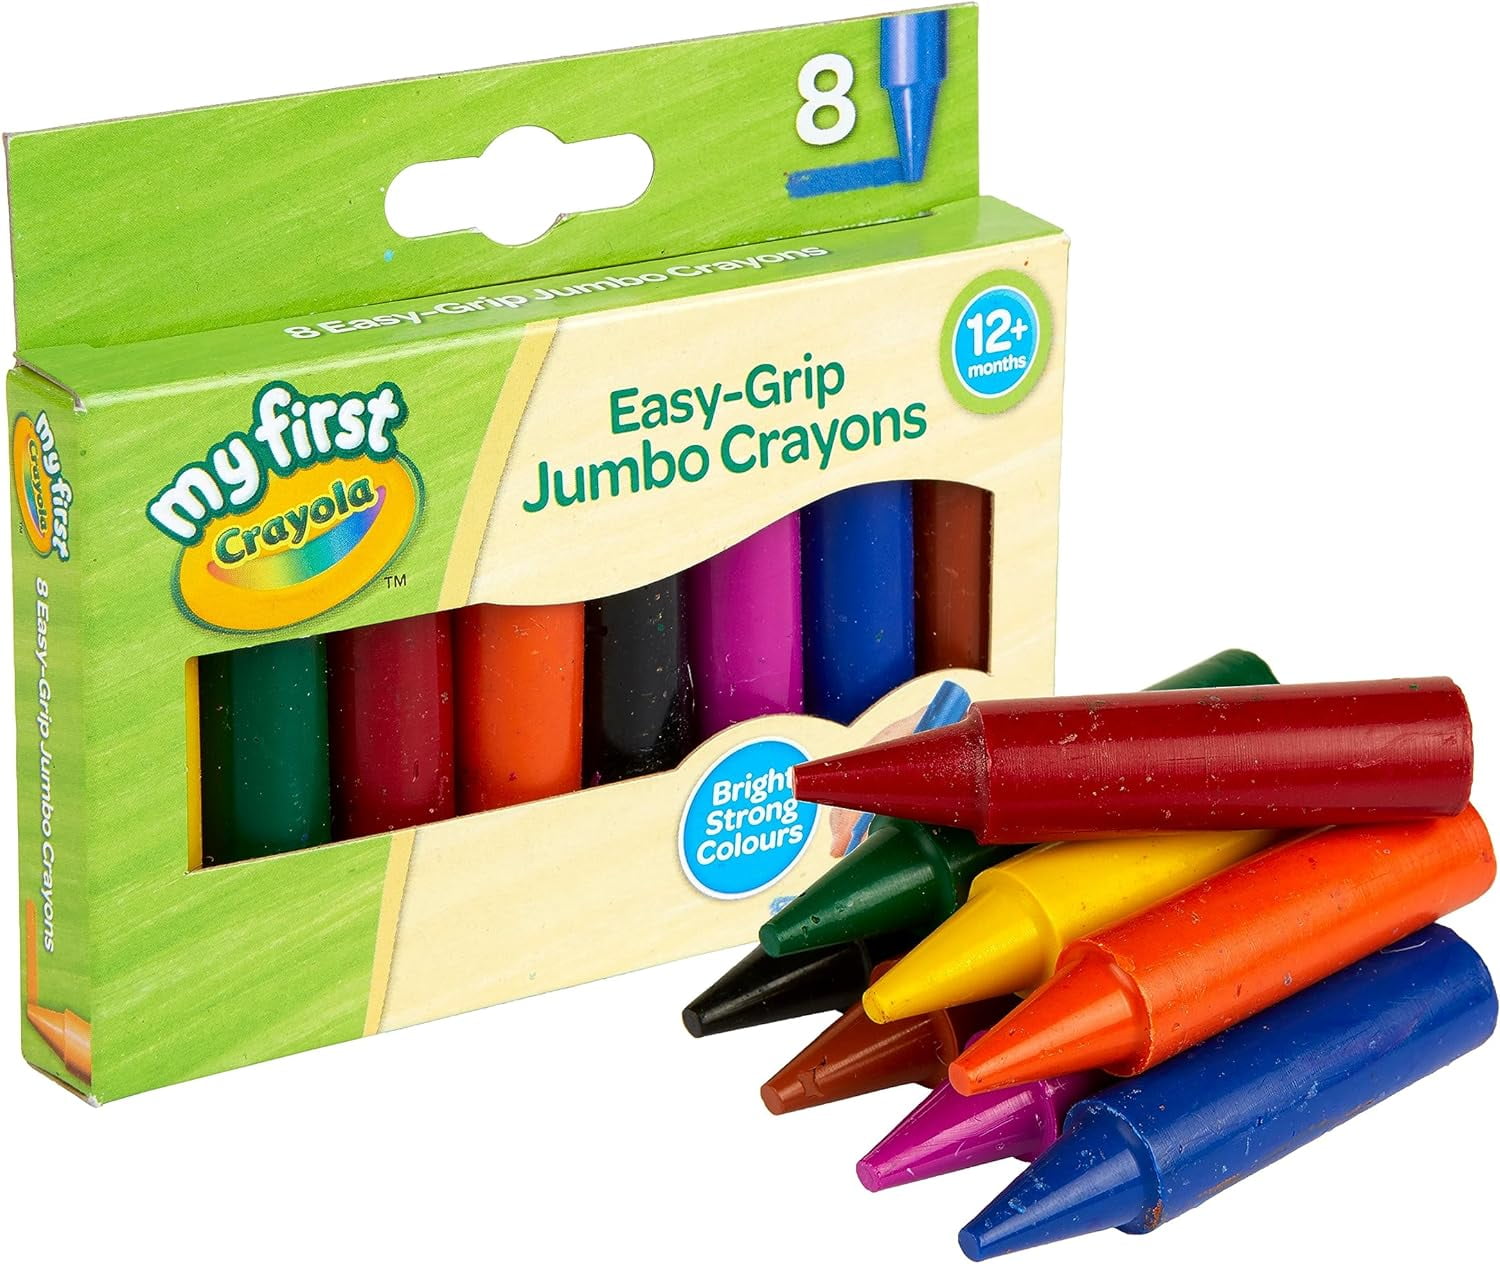 My First Crayola Easy-Grip Jumbo Crayons (Pack of 24) Creative Activity